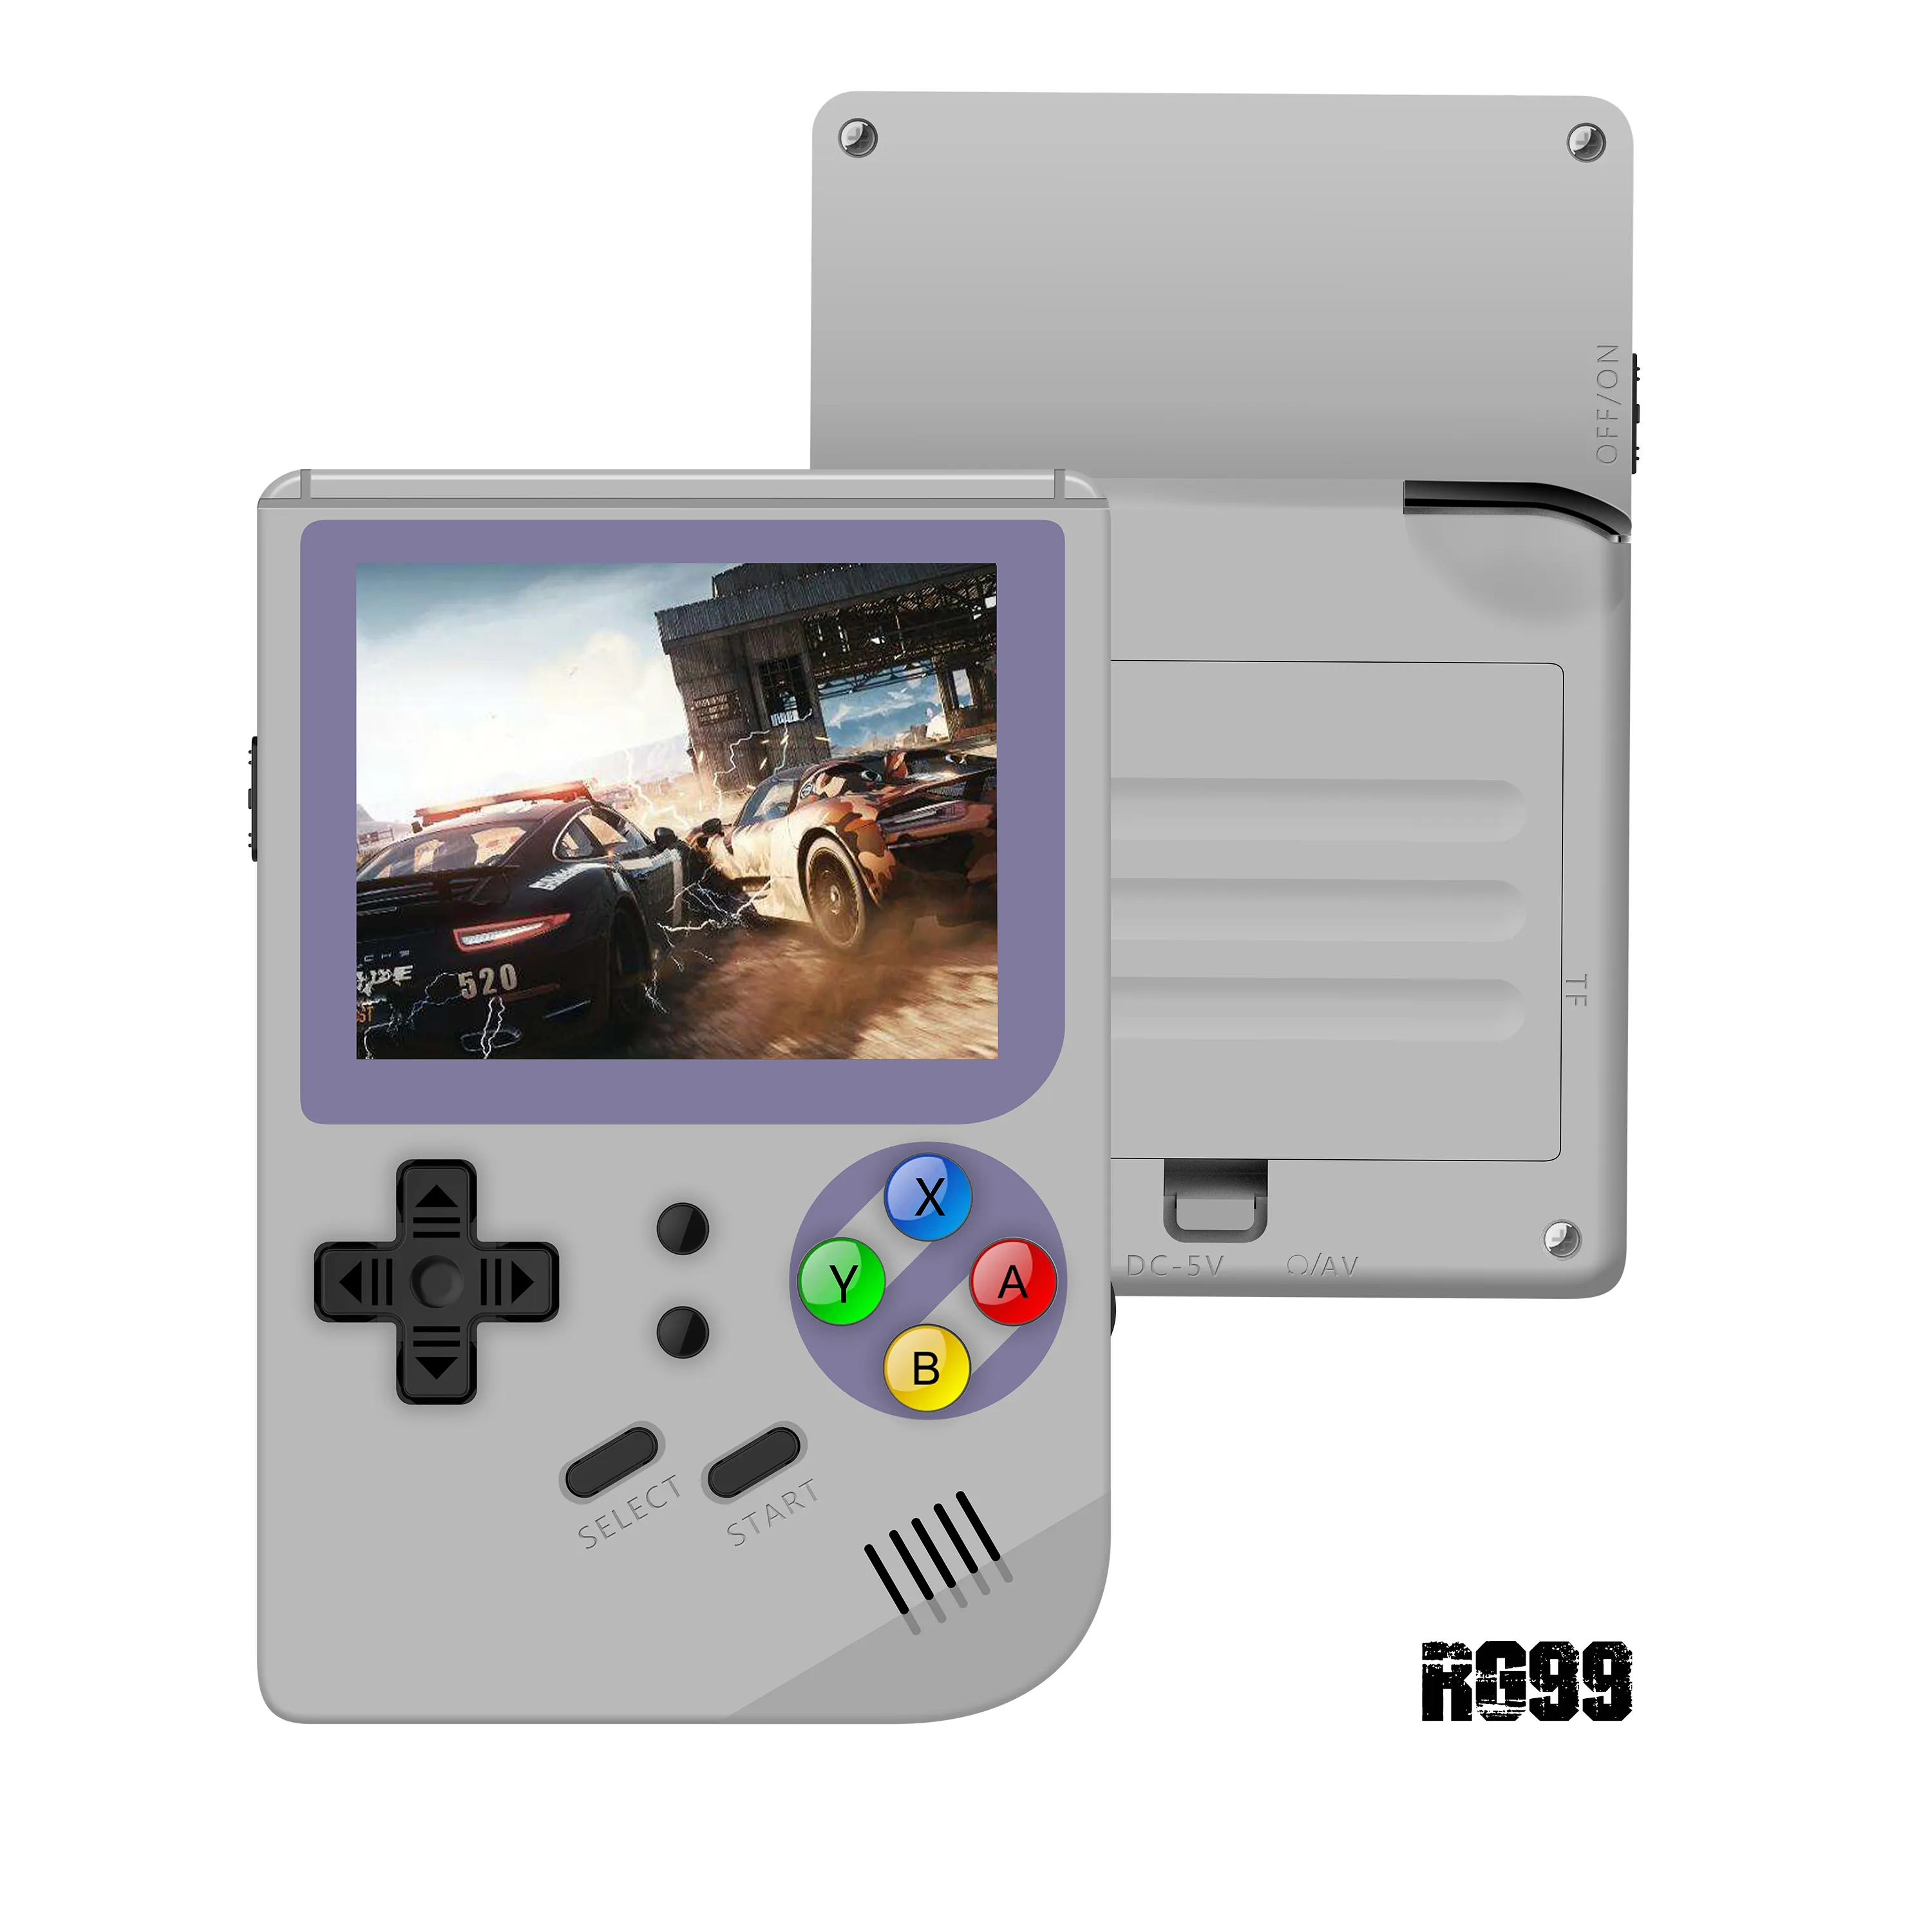 Cheap Video Game Consoles for Promotion 2.8" IPS Handheld Retro Game Console 169 Games RG99